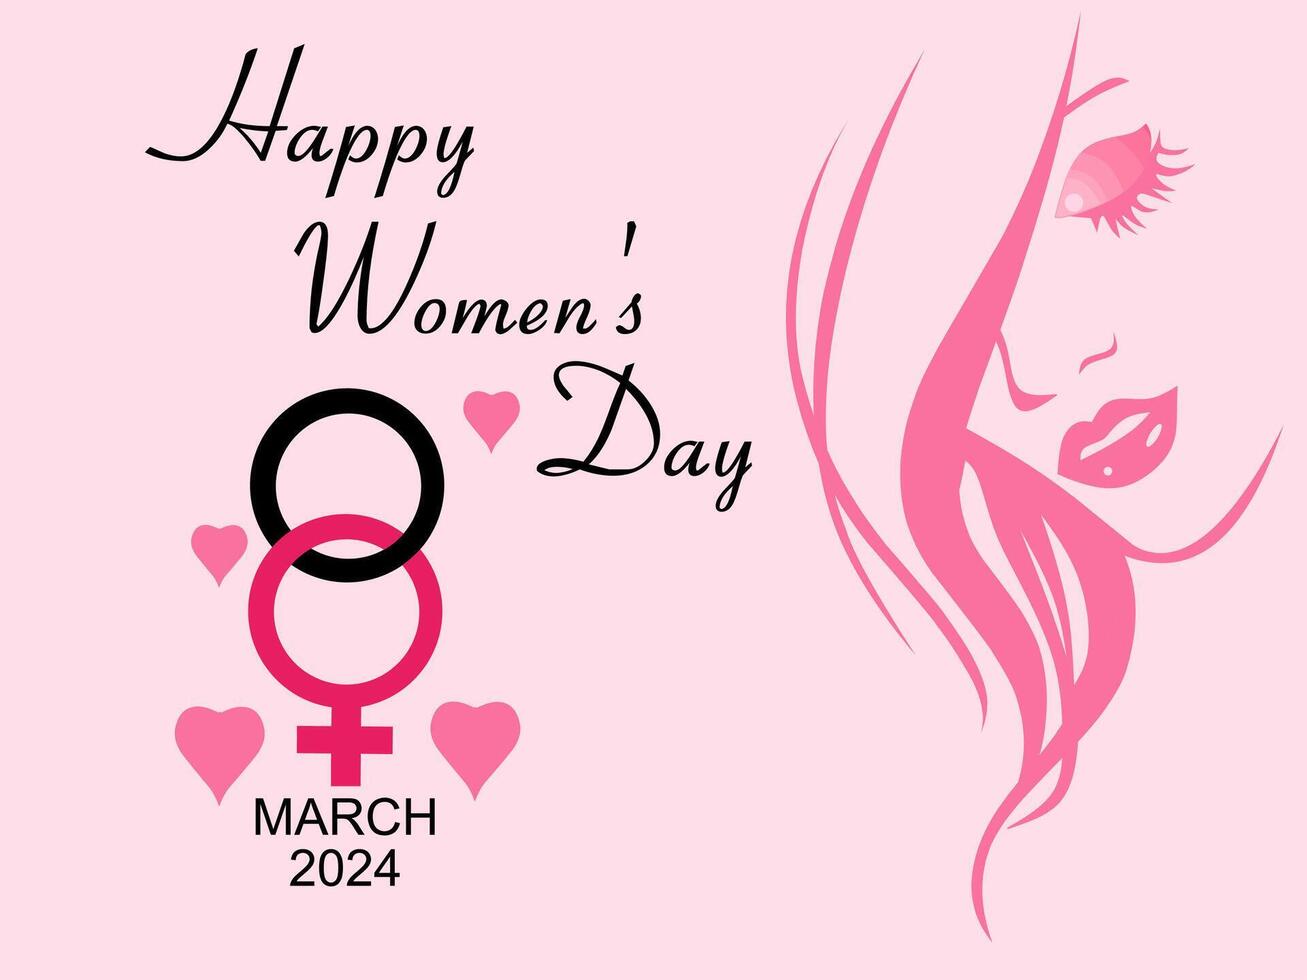 Celebration of International Women's Day on March 8, design of pink silhouette of woman's face and gender symbol together with number eight, isolated on pink background vector